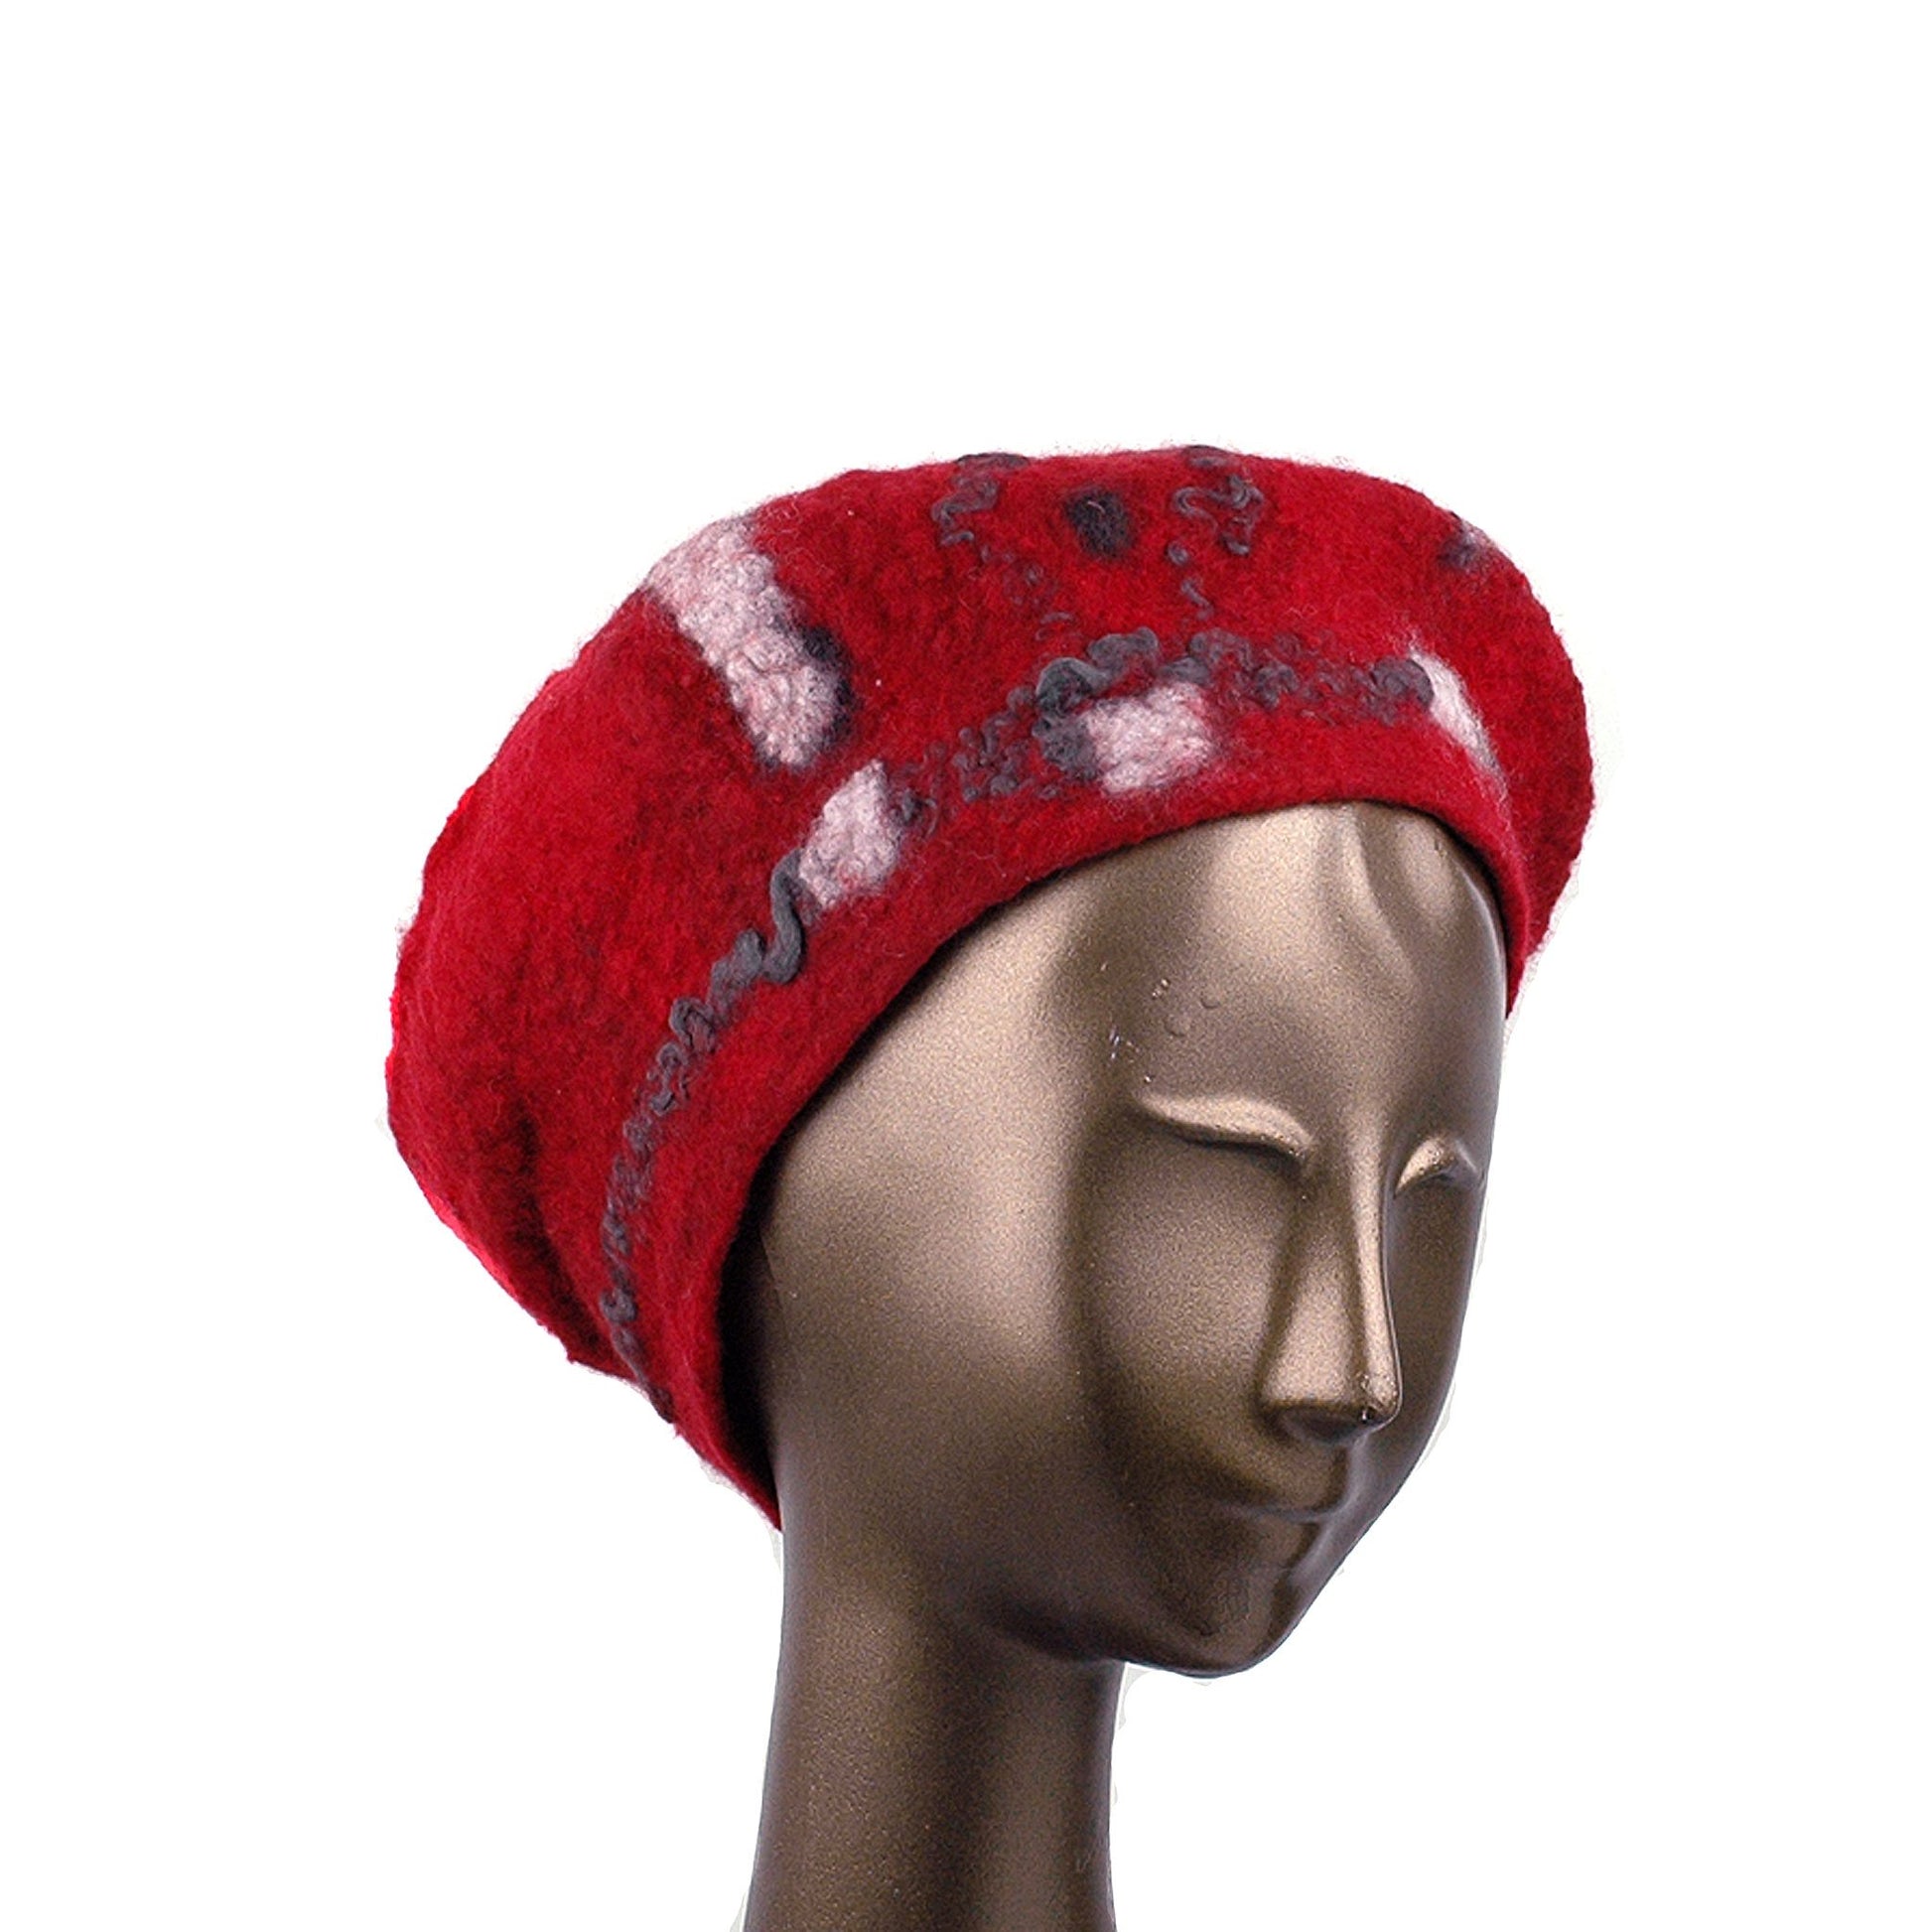 Russian Constructivist Inspired Red and Black Felted Beret - three quarters view